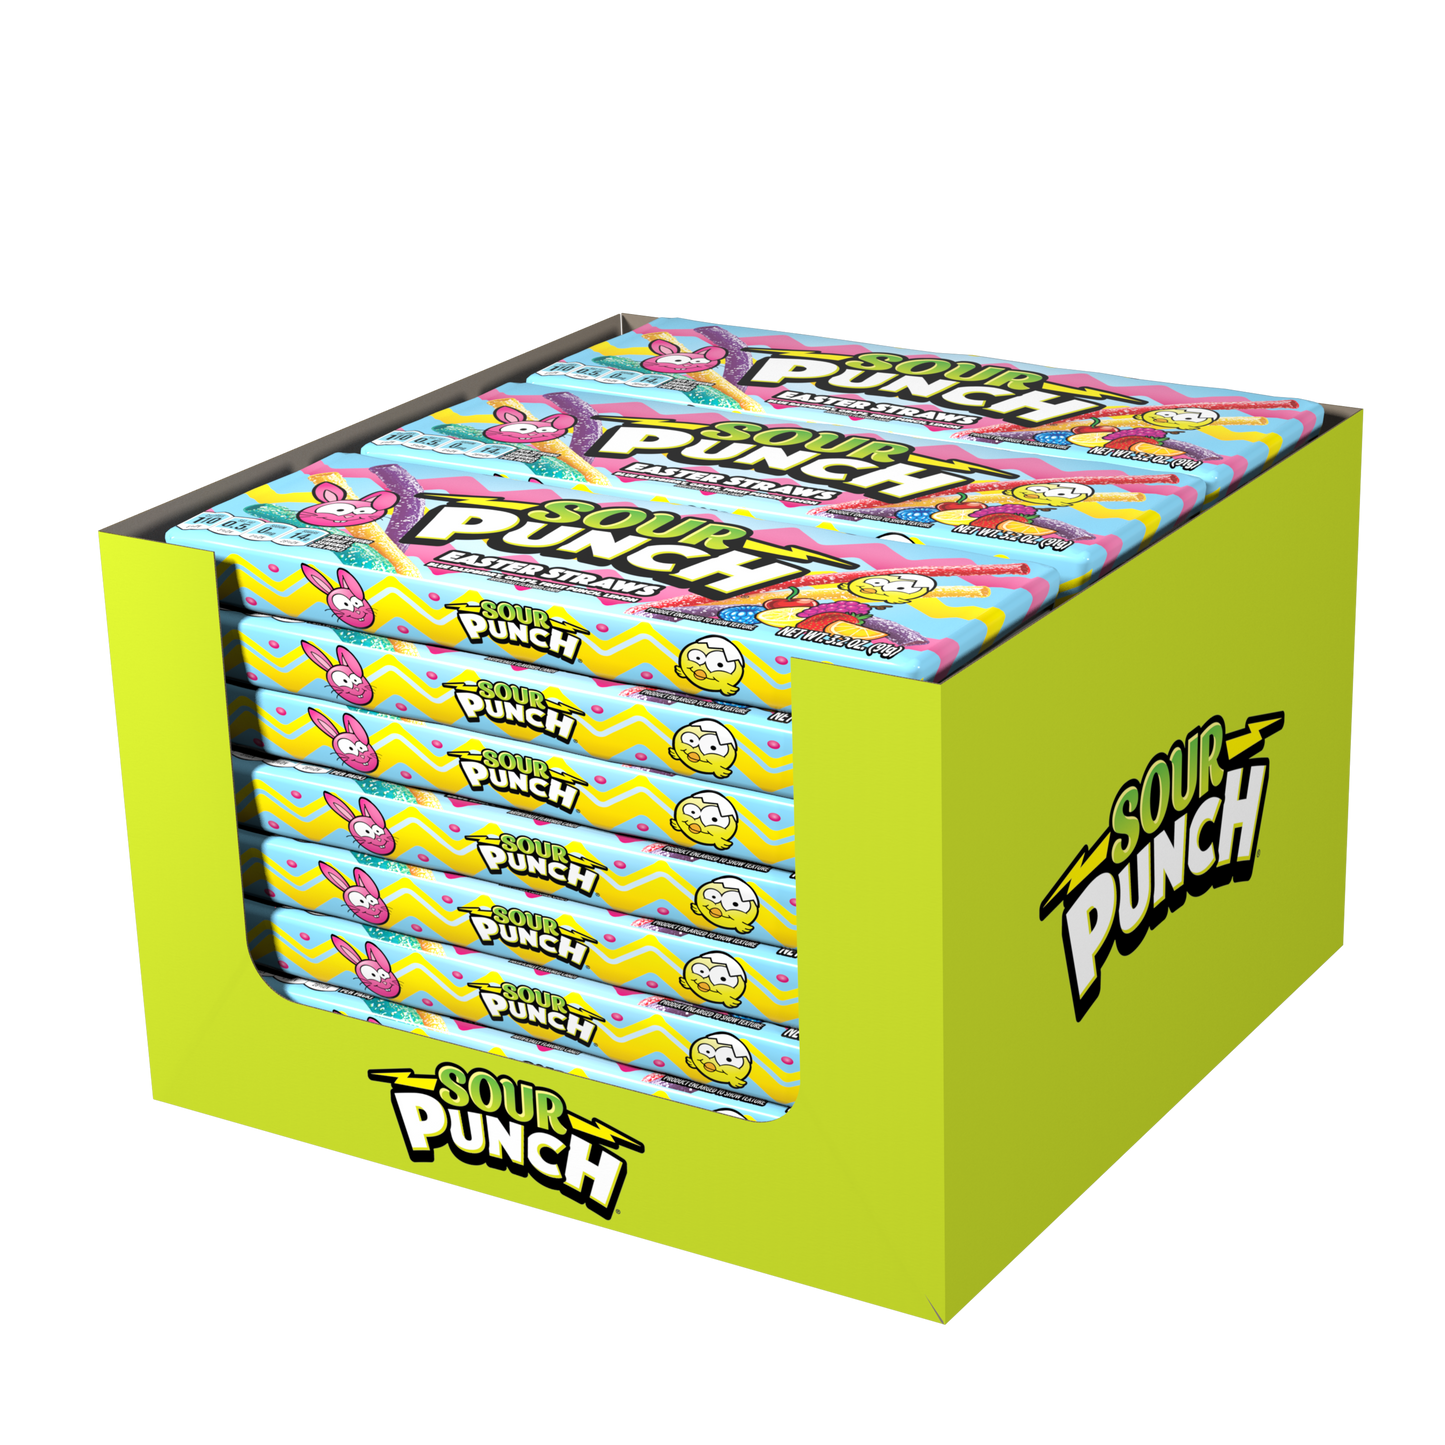 SOUR PUNCH Easter Candy Straws 24-pack of 3.2oz trays